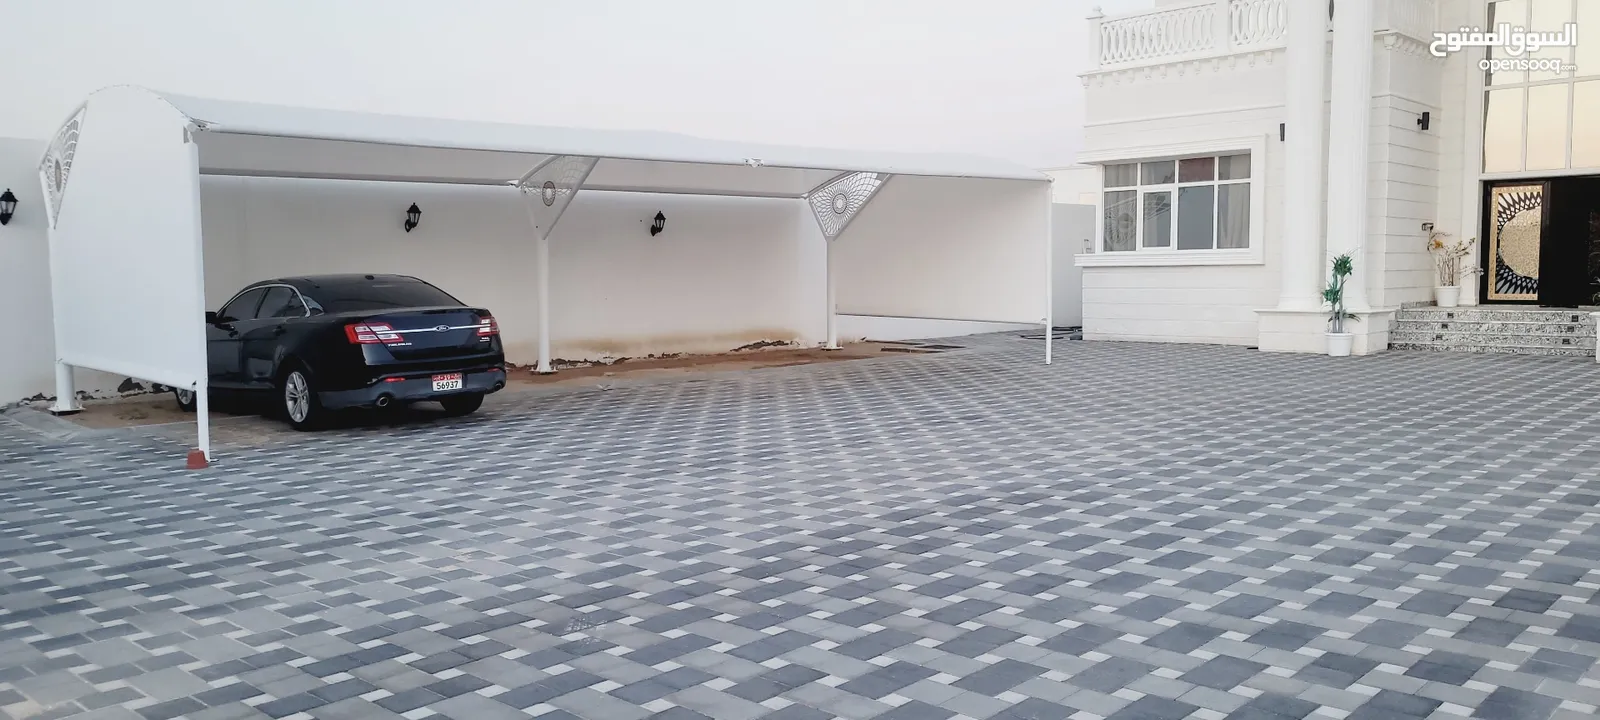 -We Make all types of Car Parking Shades in All our UAE